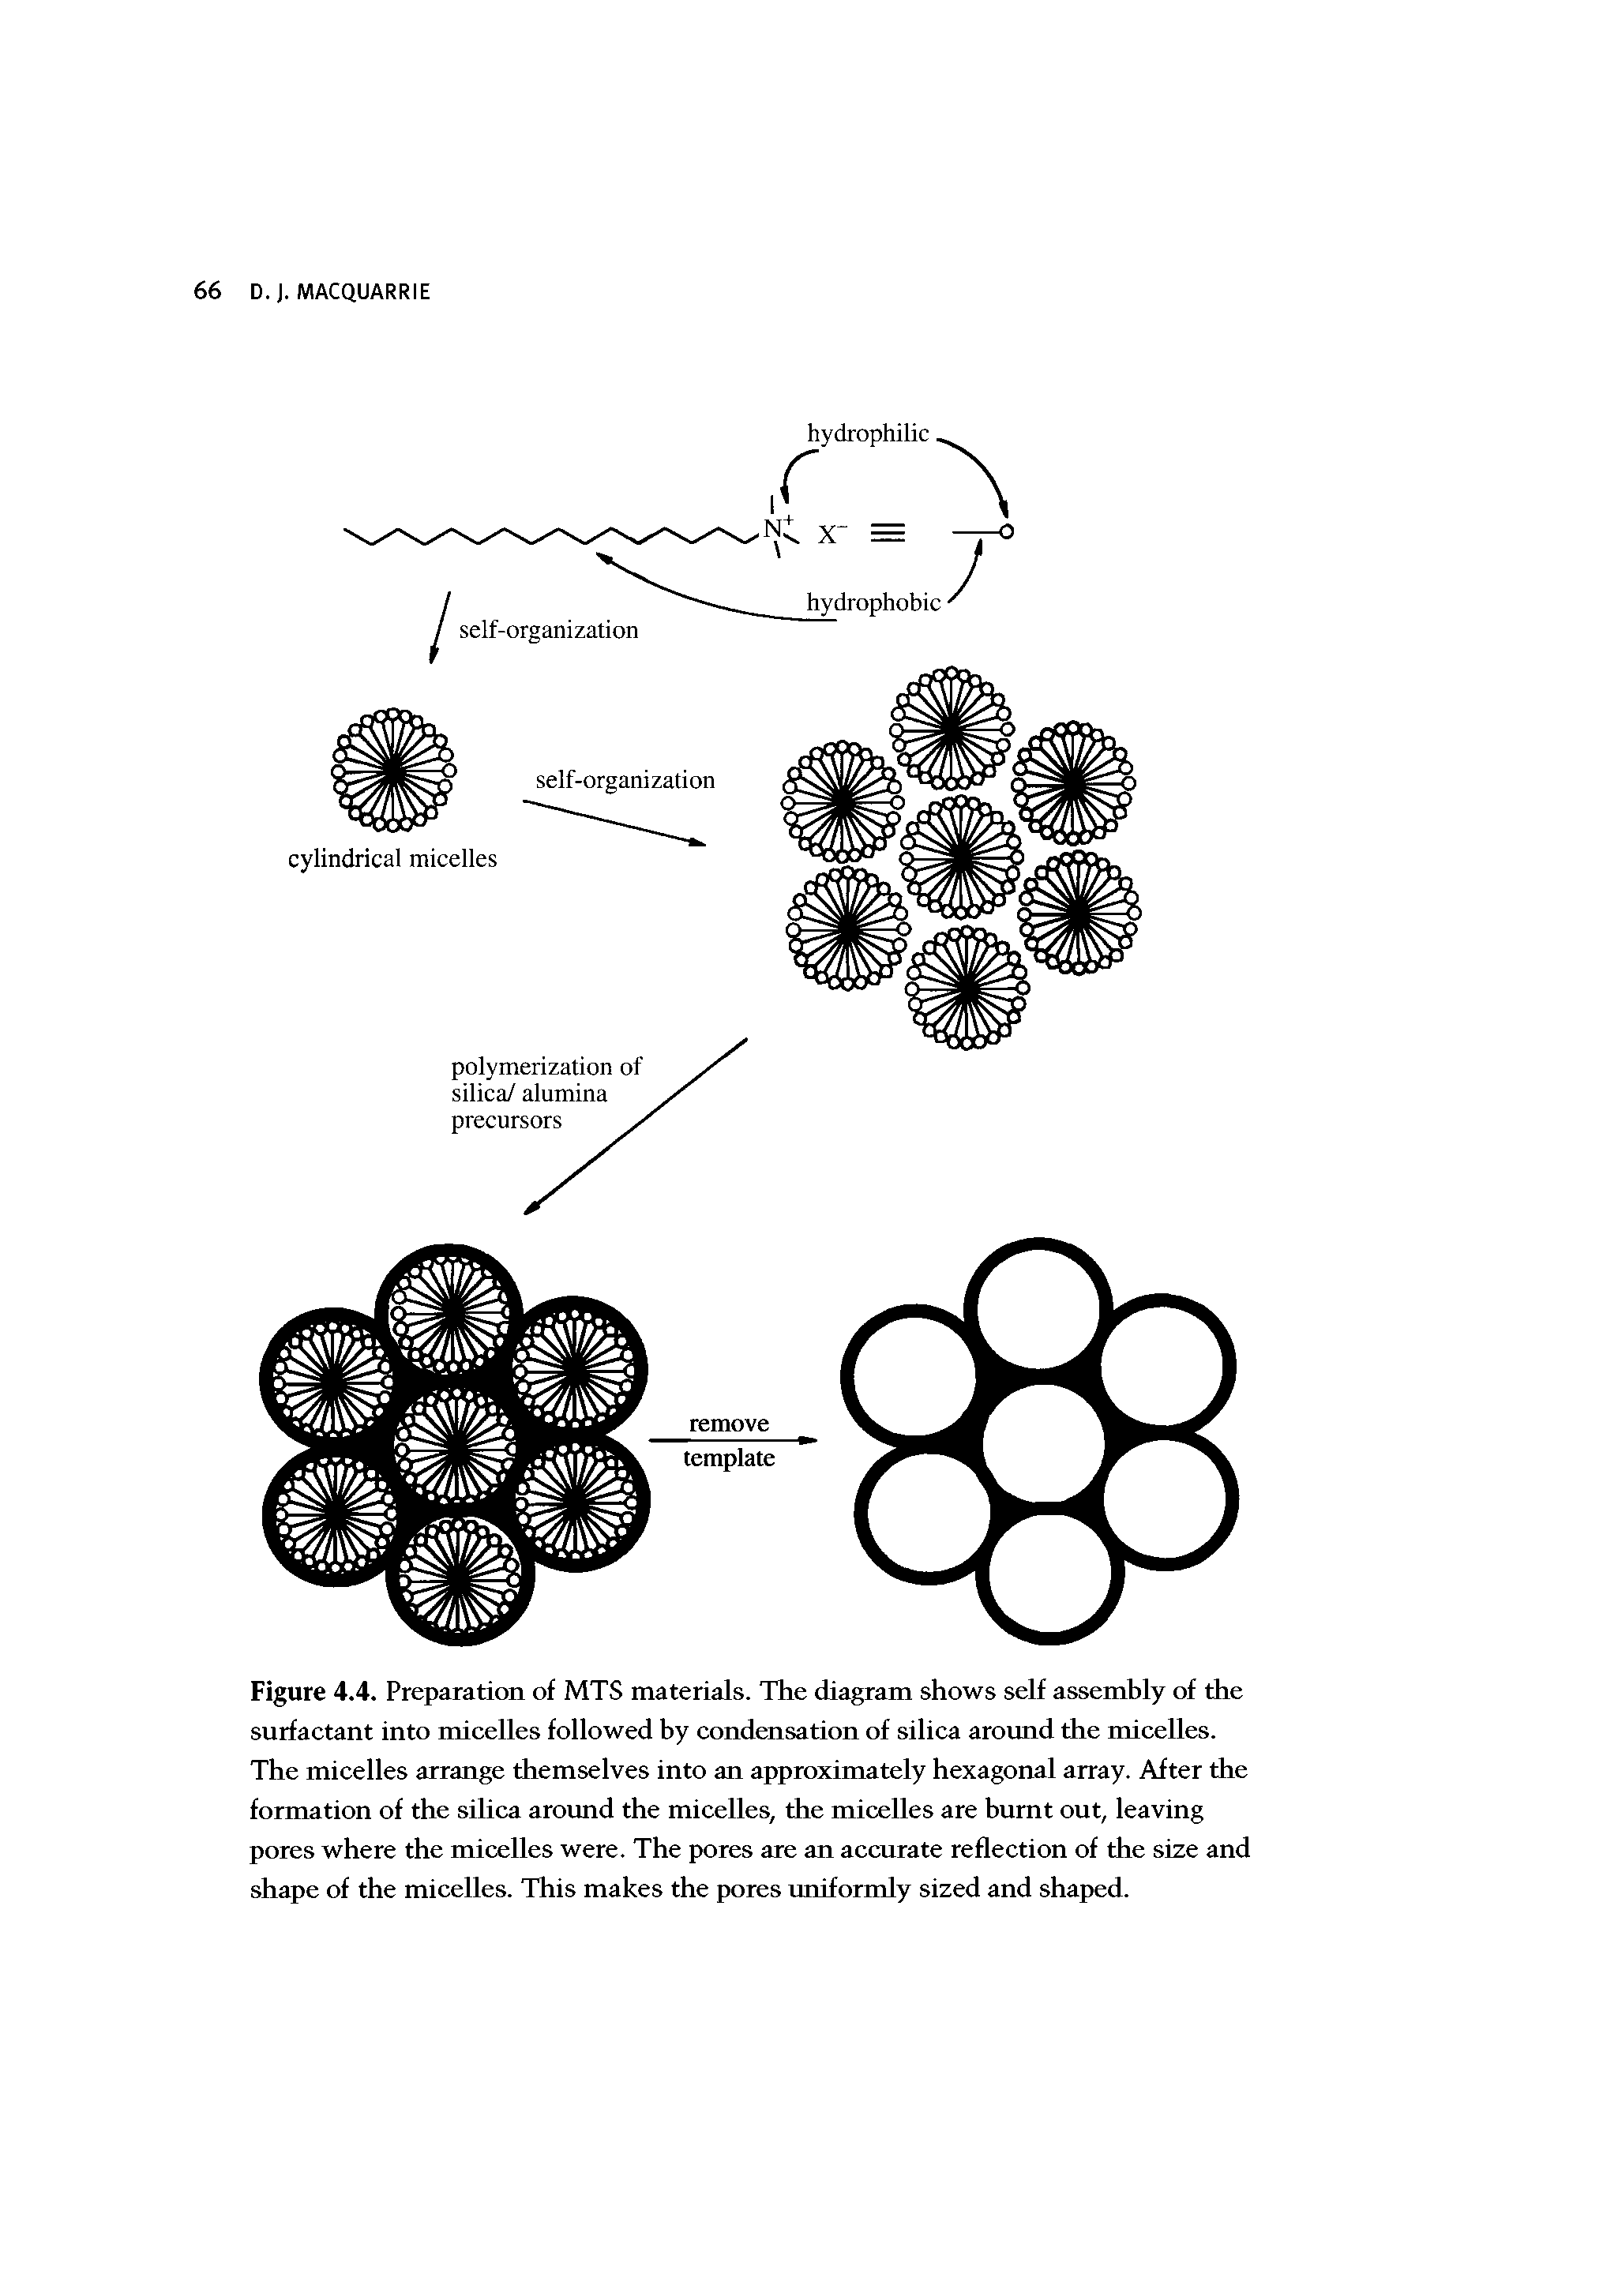 Figure 4.4. Preparation of MTS materials. The diagram shows self assembly of the surfactant into micelles followed by condensation of silica around the micelles. The micelles arrange themselves into an approximately hexagonal array. After the formation of the silica around the micelles, the micelles are burnt out, leaving pores where the micelles were. The pores are an accnrate reflection of the size and shape of the micelles. This makes the pores uniformly sized and shaped.